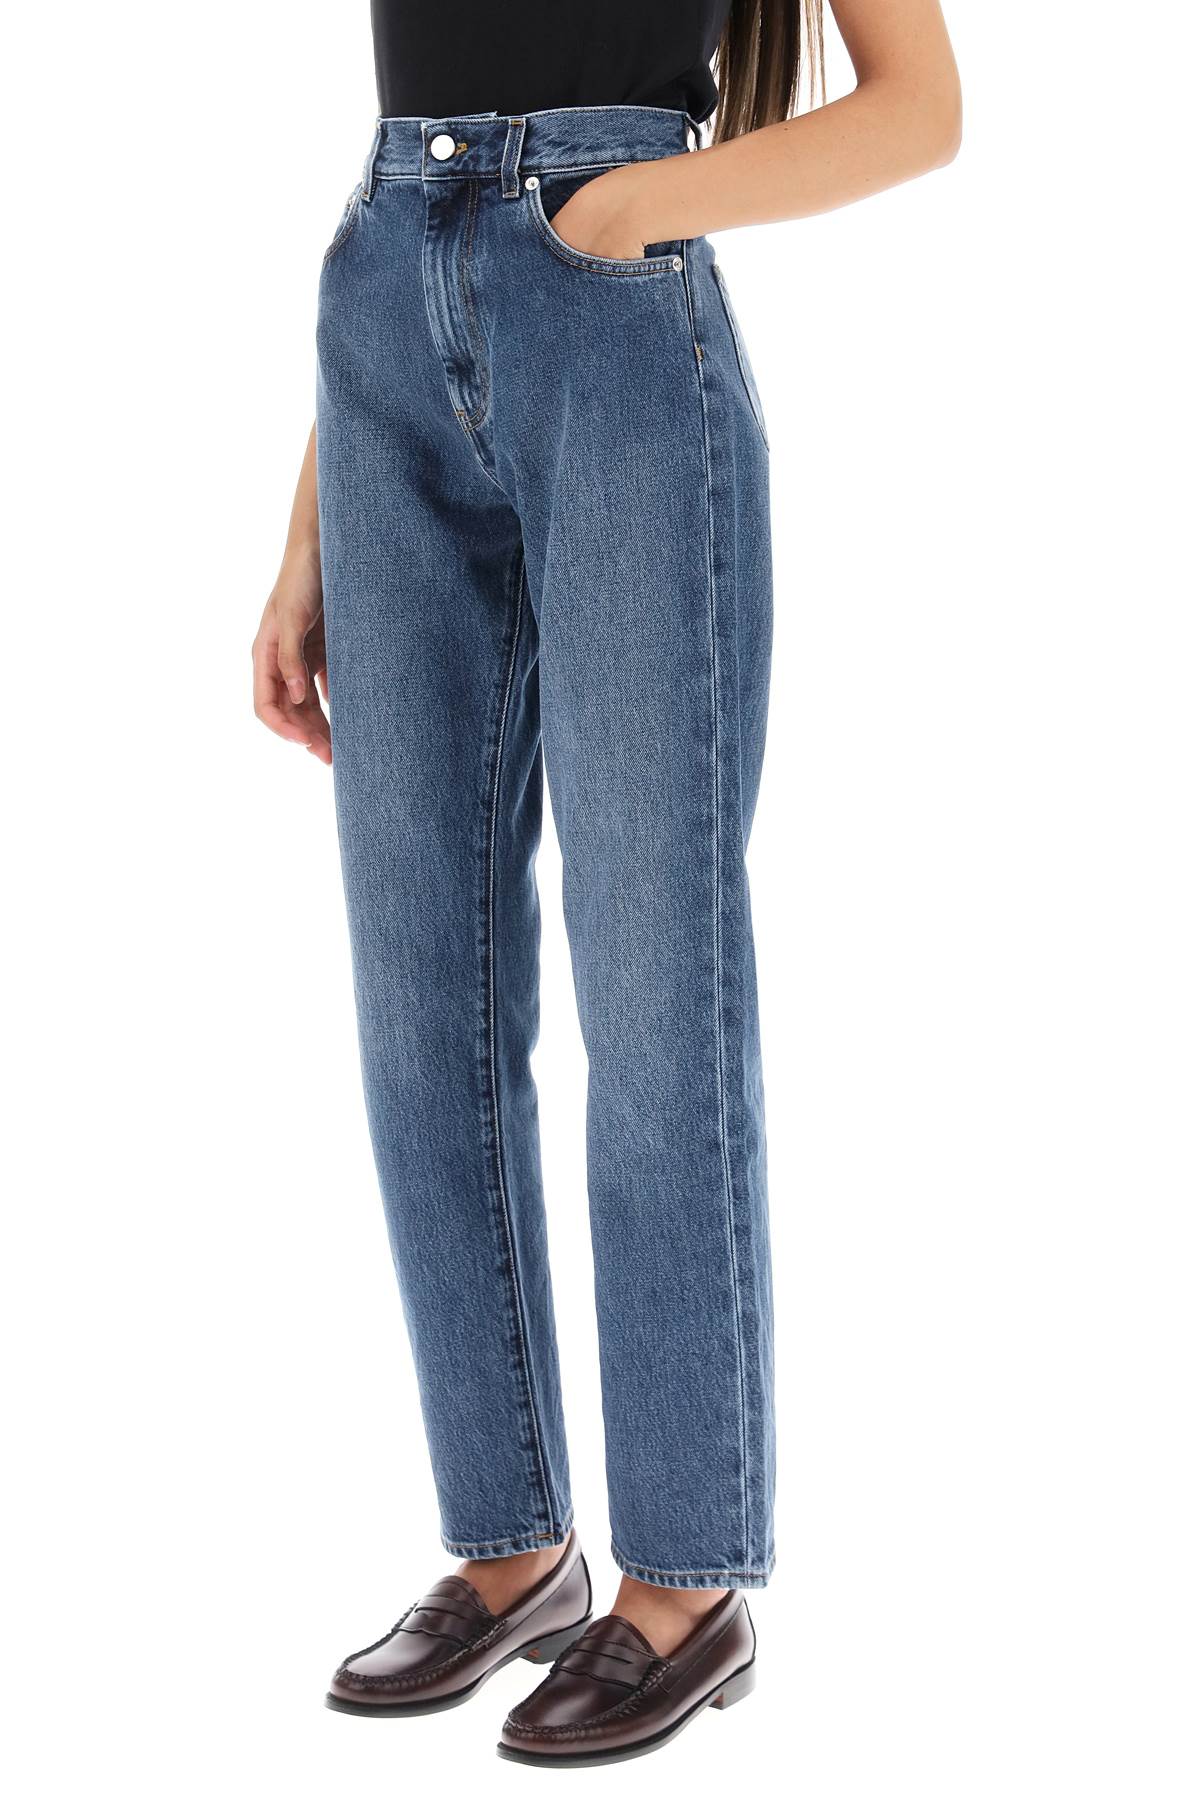 Loulou studio cropped straight cut jeans-3